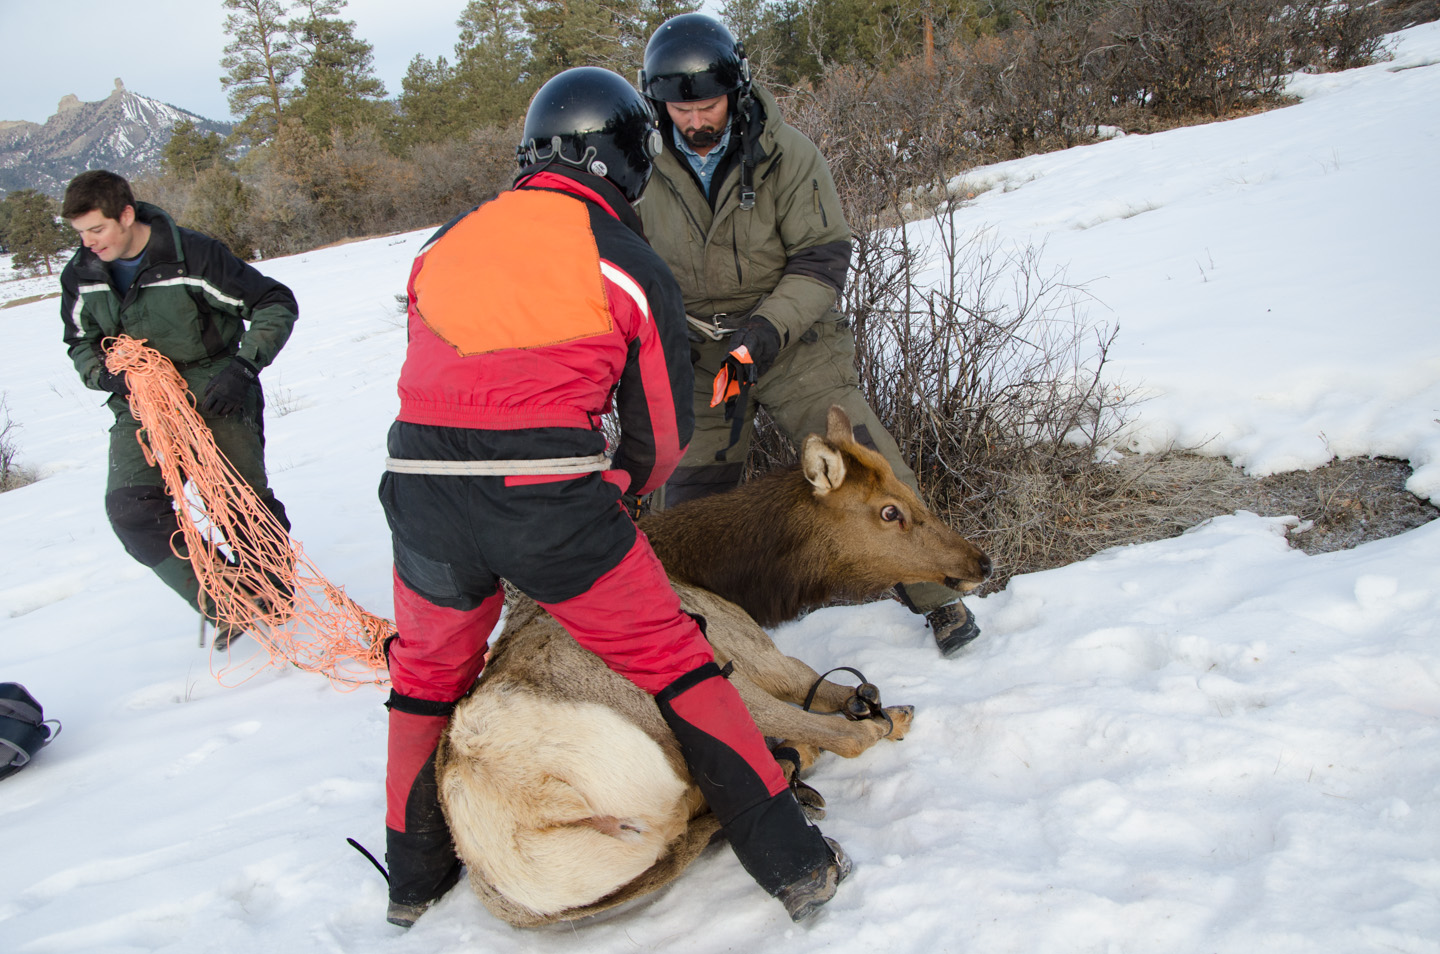 Removing the capture net, the elk are then hobbled and collared.